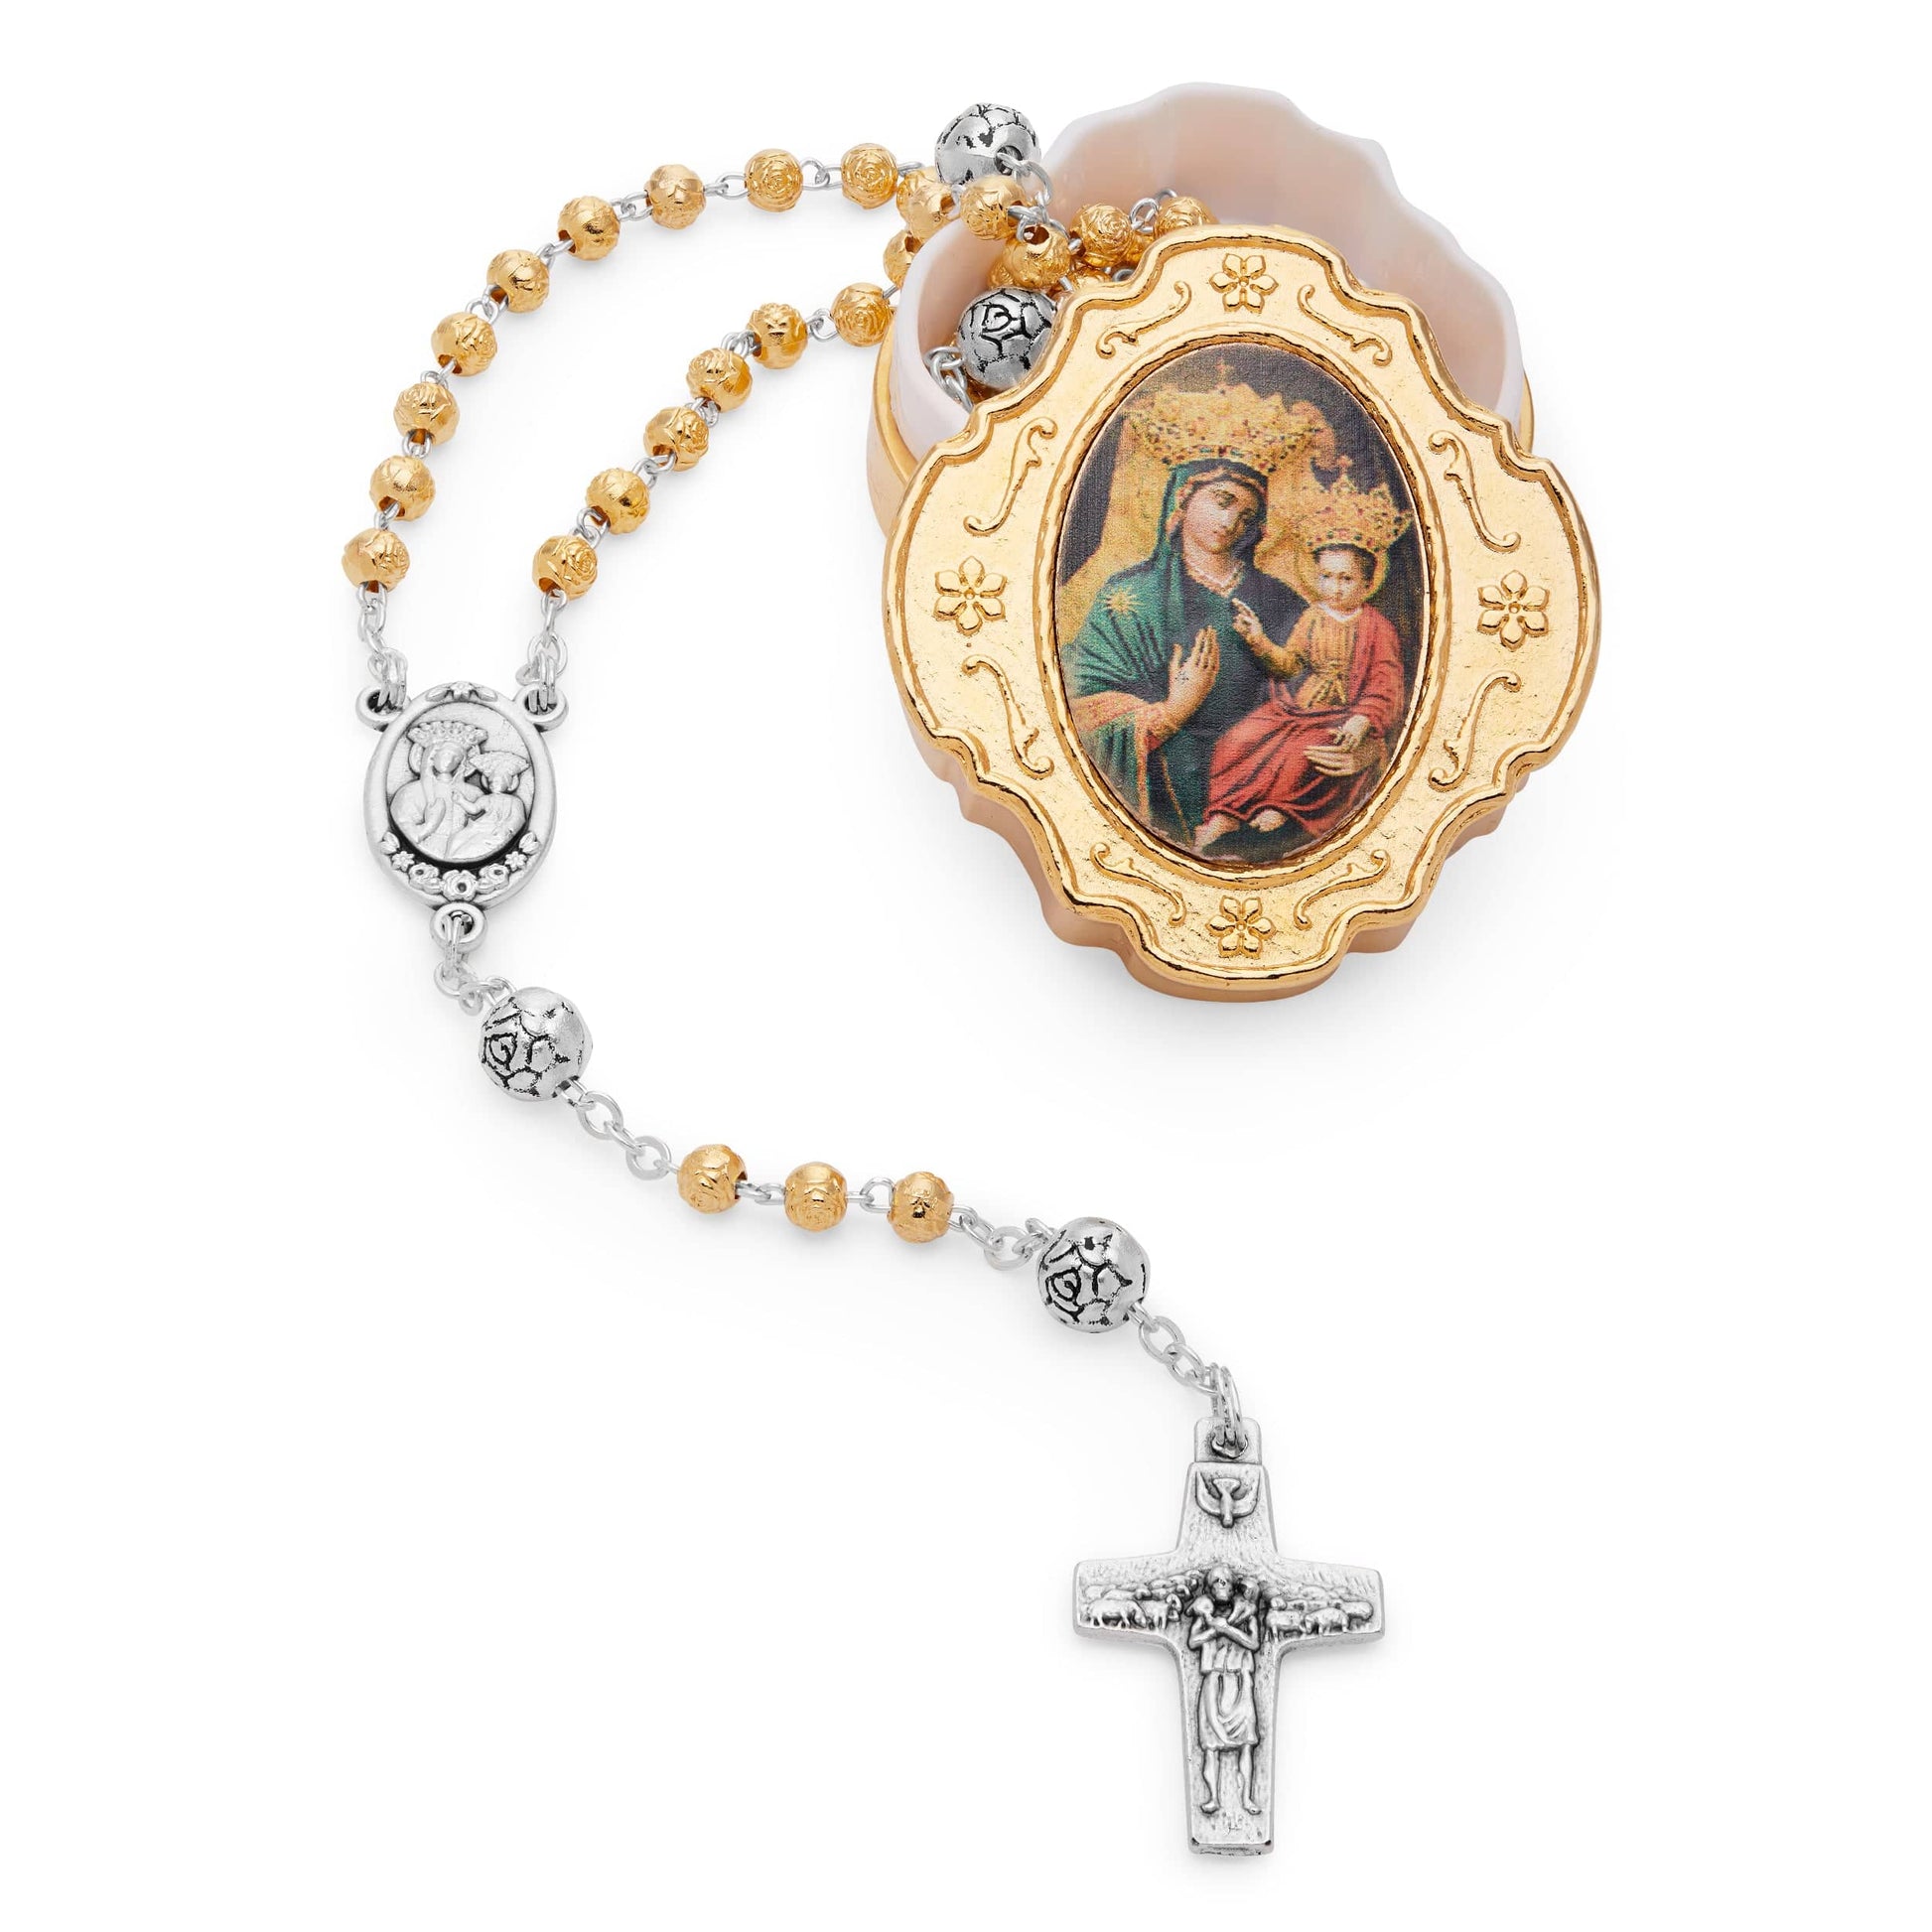 MONDO CATTOLICO Prayer Beads 32 cm (12.6 in) / 4 mm (0.15 in) Keepsake Case and Rosary of Mater Salutis